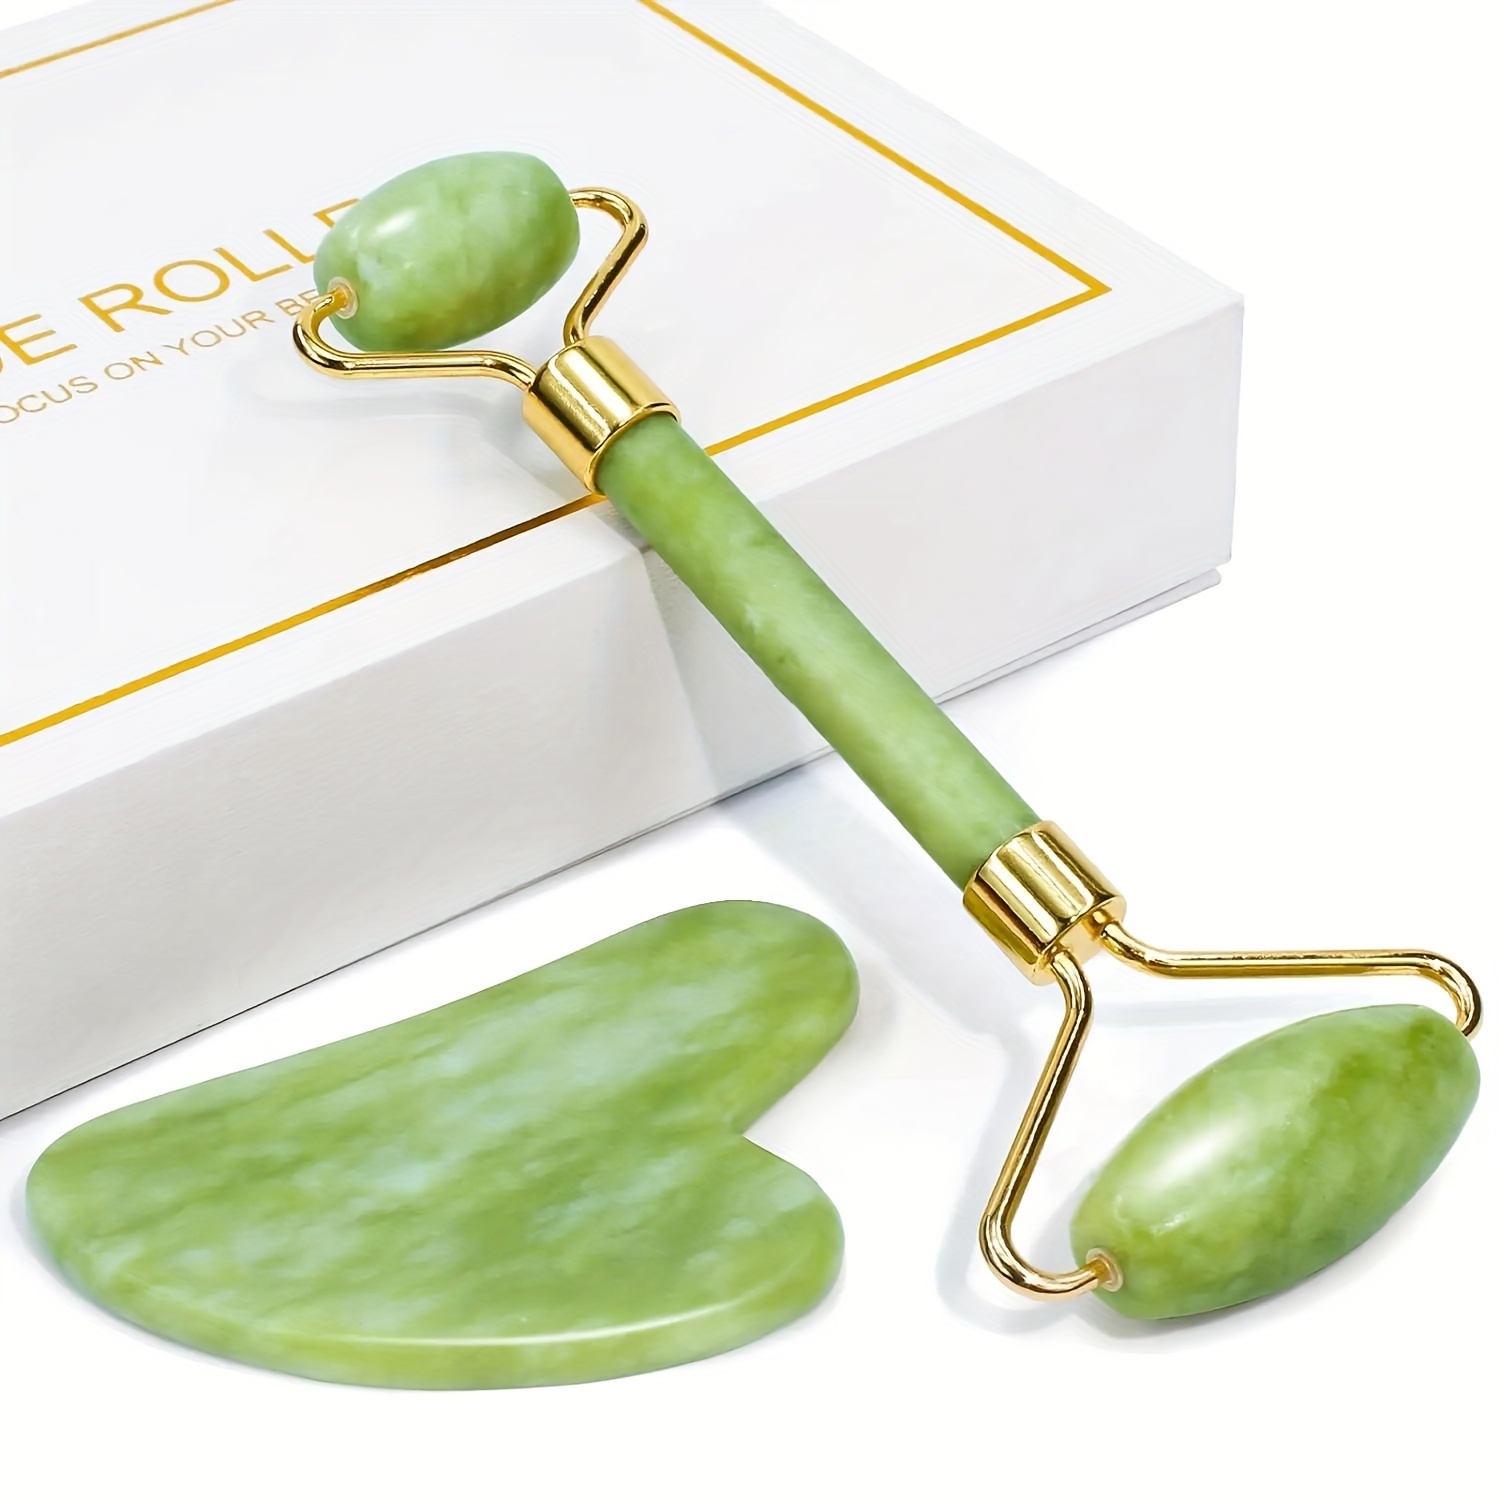 

2pcs/set, Jade Roller & Gua Sha Facial Tools Face Roller And Gua Sha Set For Skin Care Routine And Puffiness, Self Care Set For Men Women